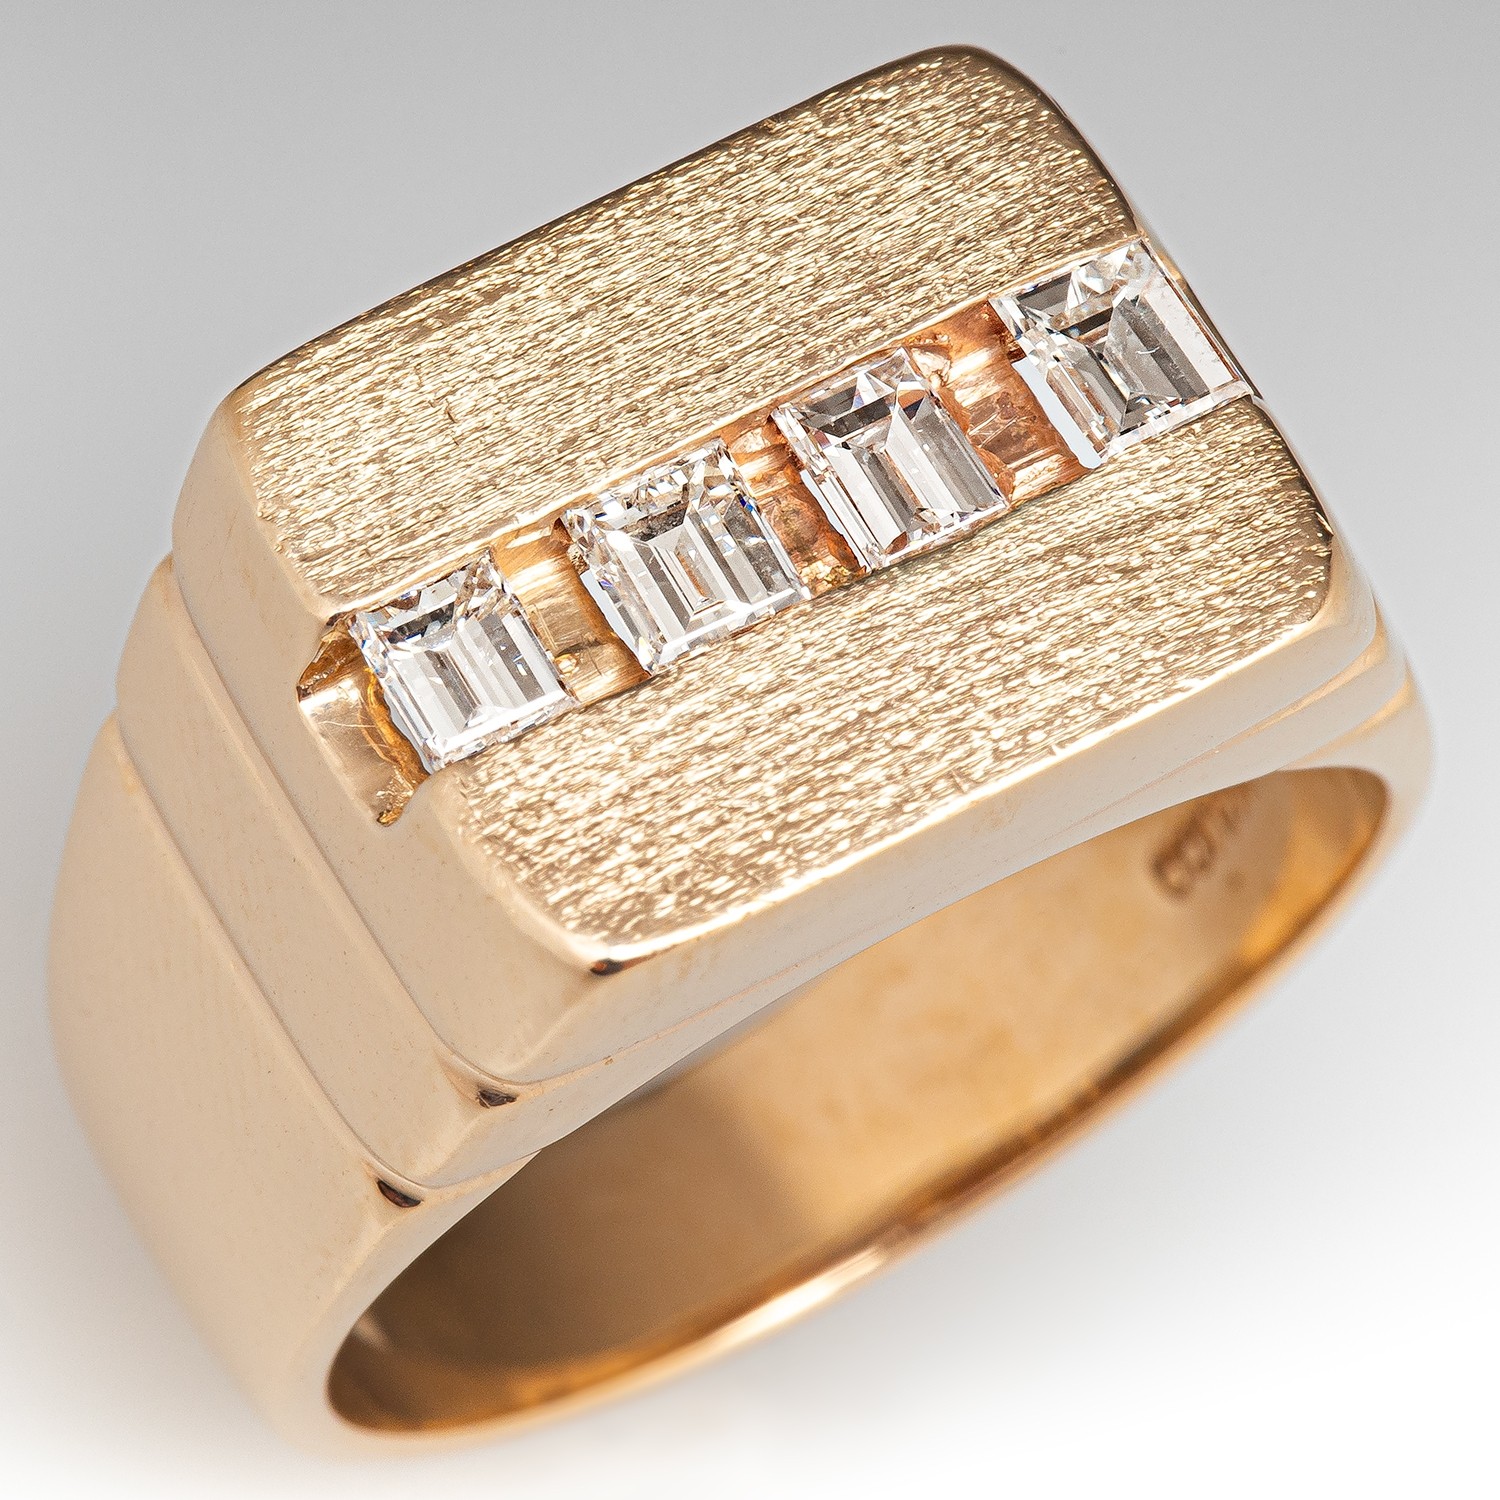 14KT Yellow Gold and Diamond Ring for Men | SEHGAL GOLD ORNAMENTS PVT. LTD.